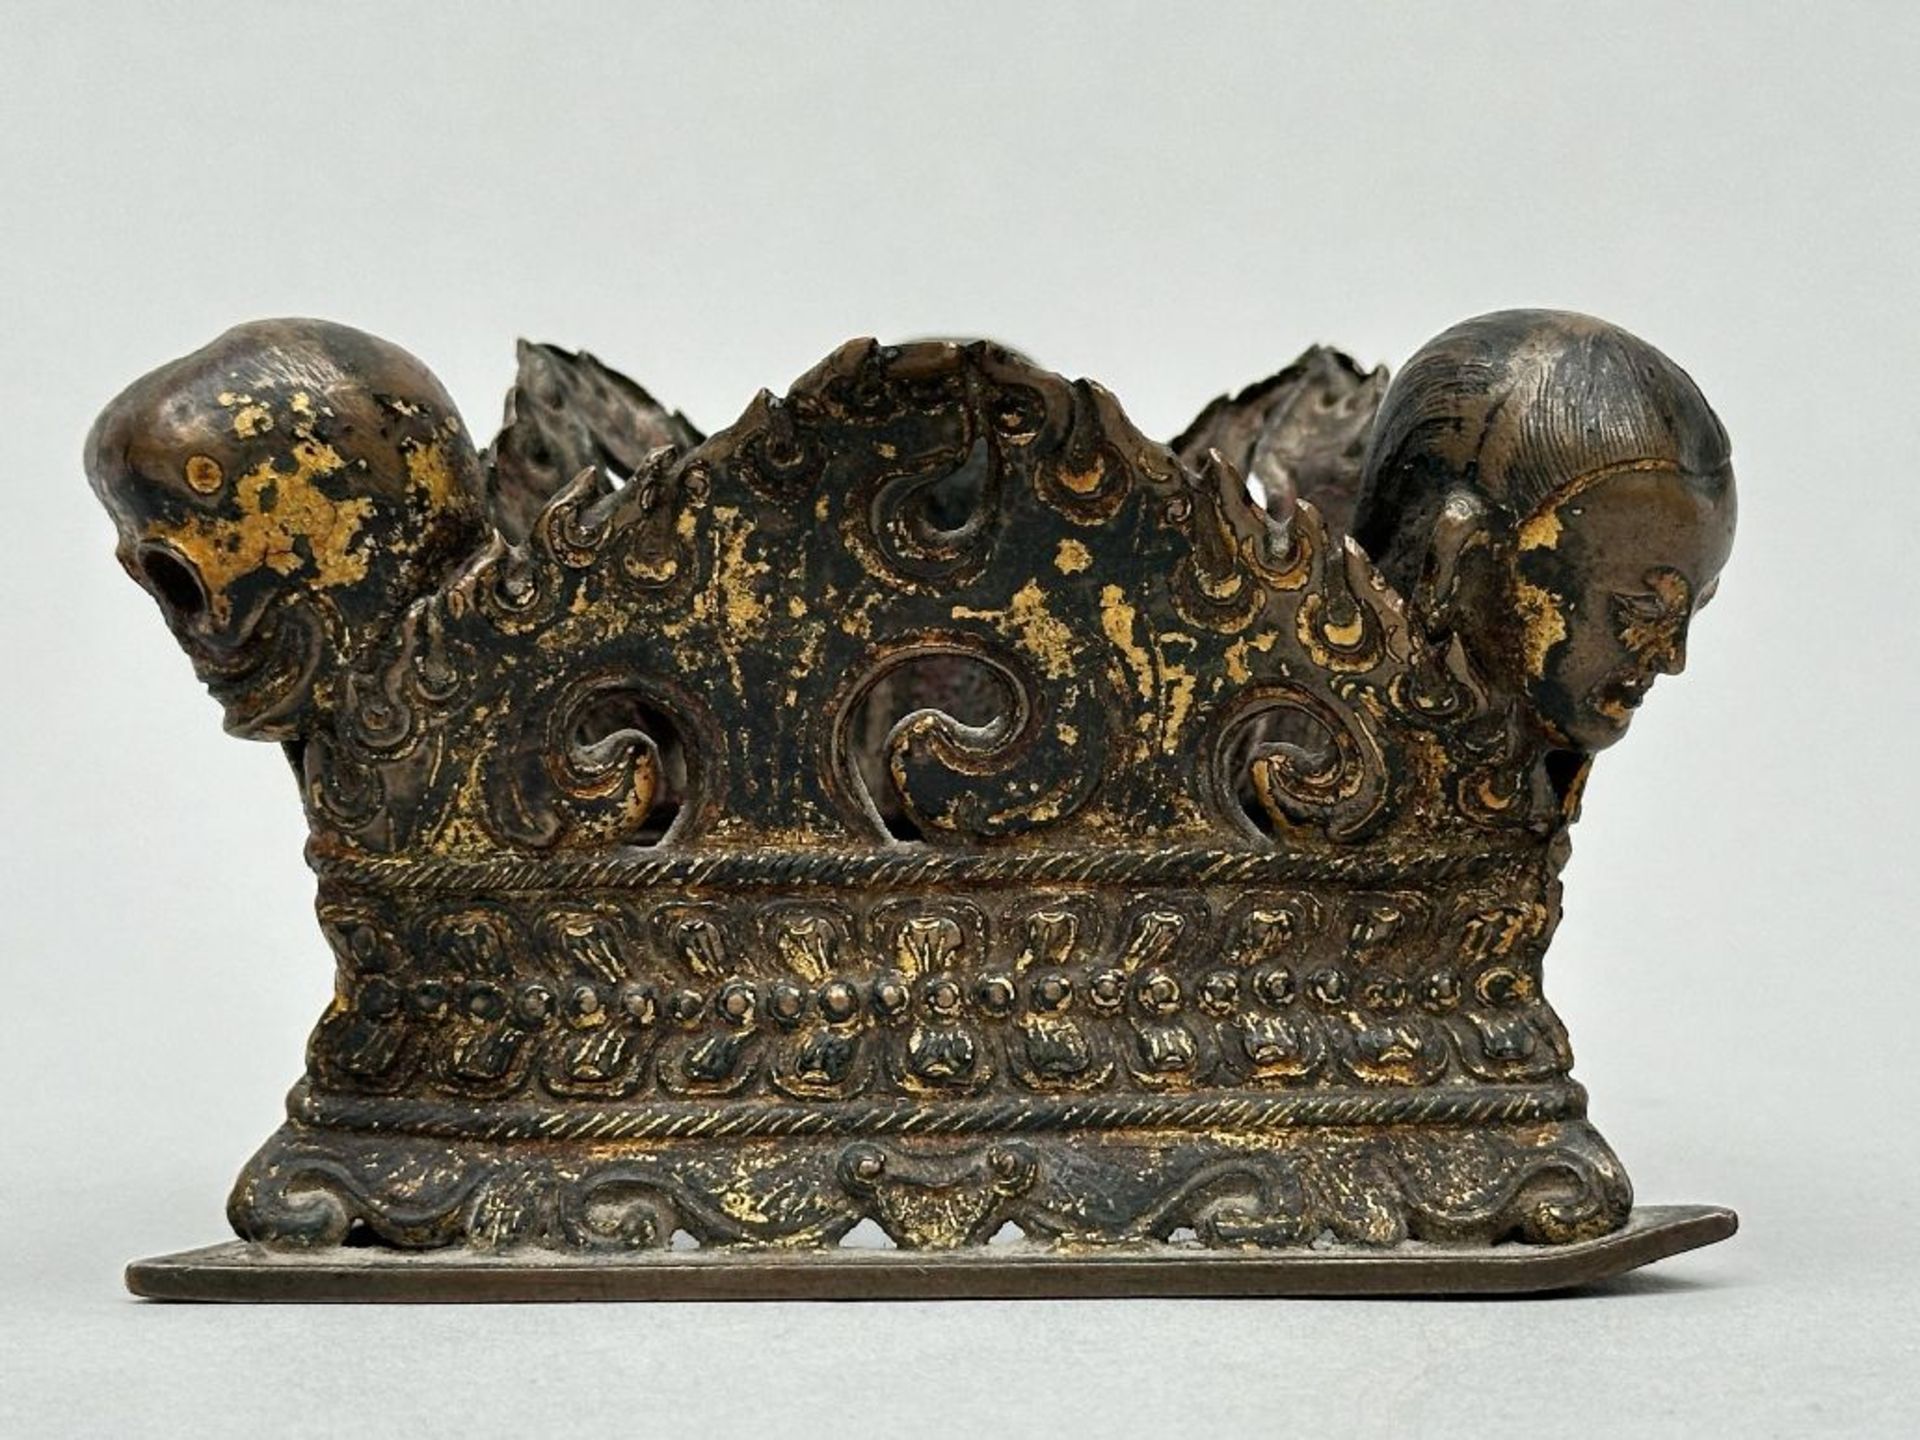 Kapala holder in lacquered metal, Tibet 18th century - Image 6 of 9